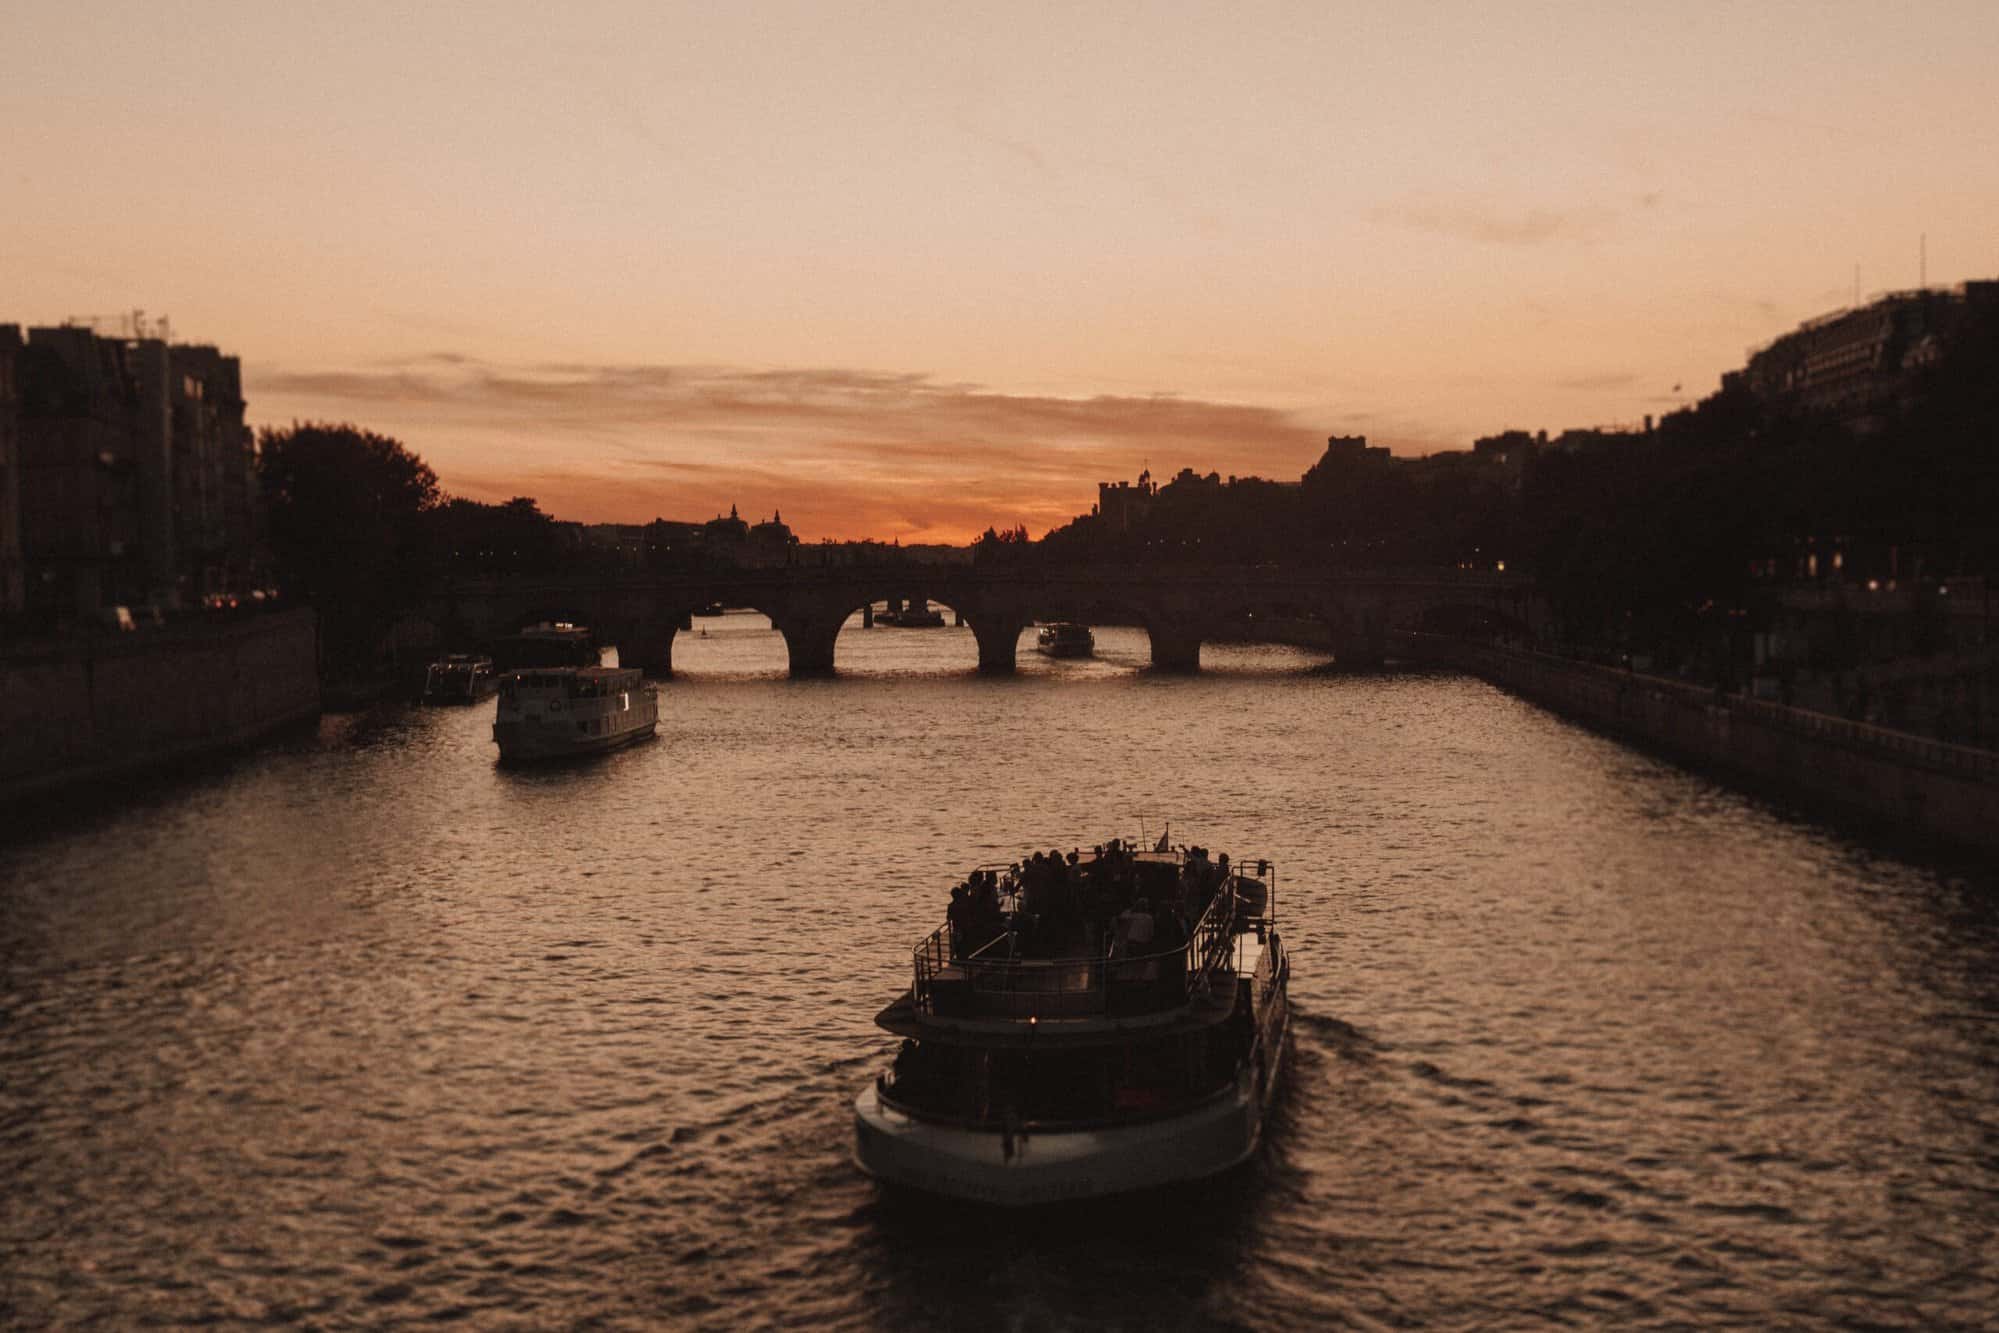 Boats on the Seine in Paris by sunset.